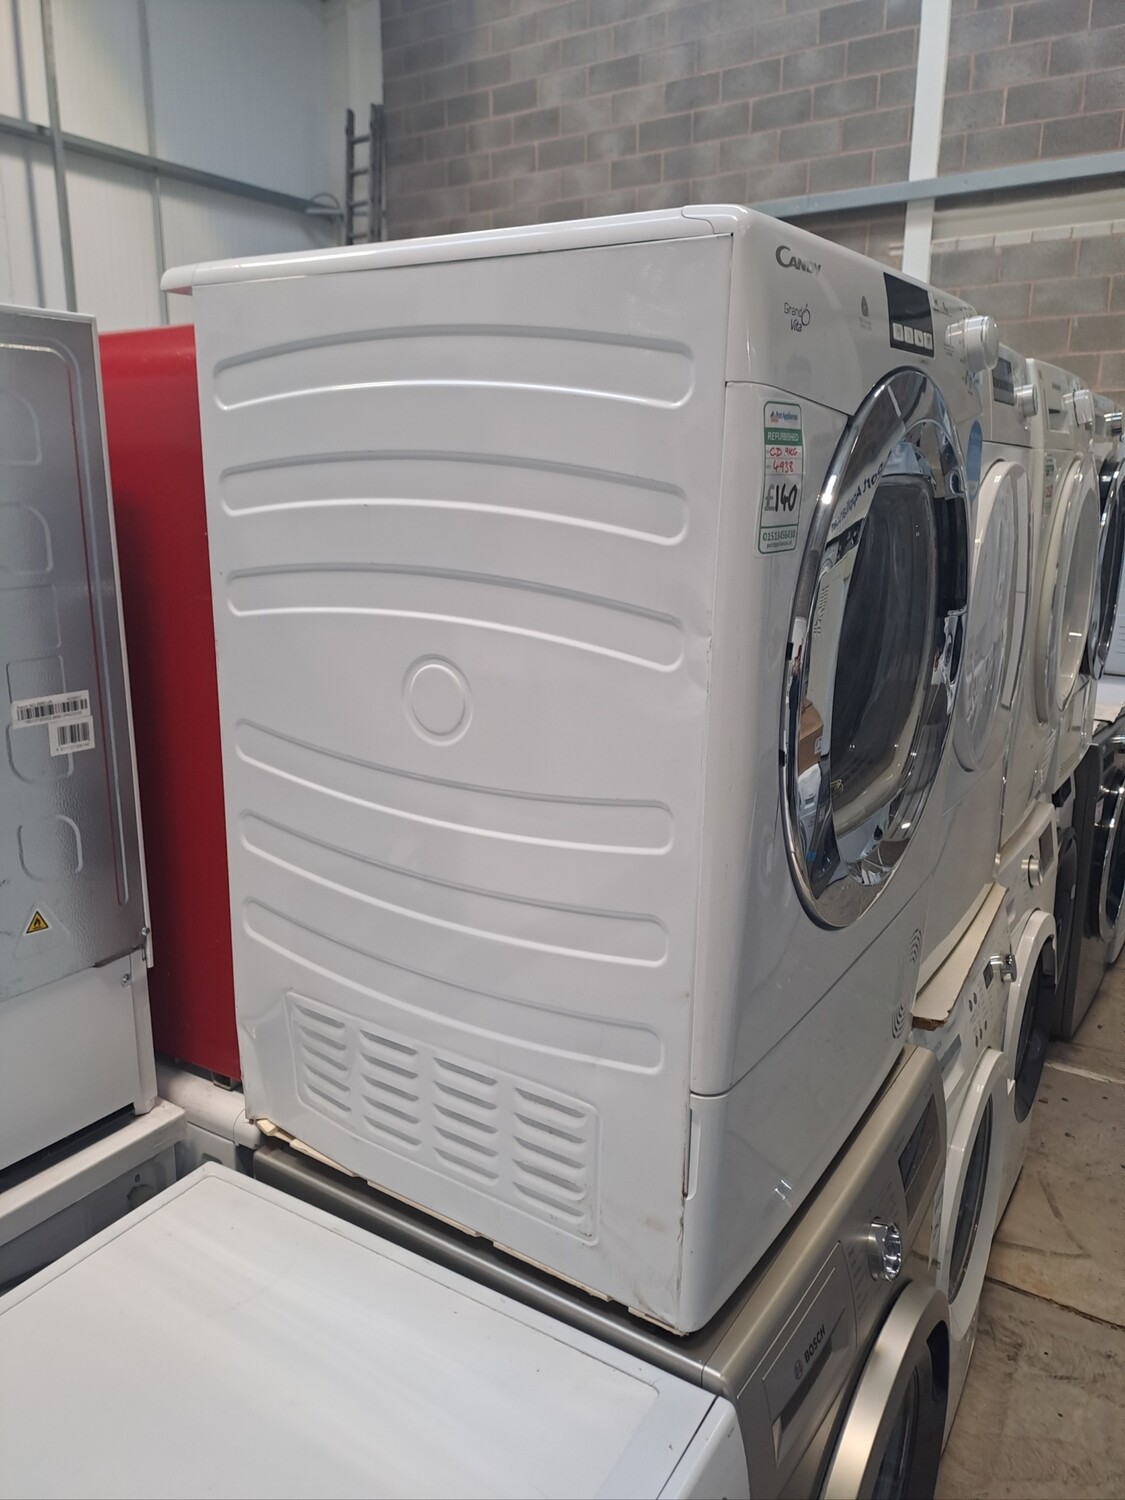 Candy GVCD91CB 9kg Condenser Dryer White Refurbished 6 Months Guarantee 